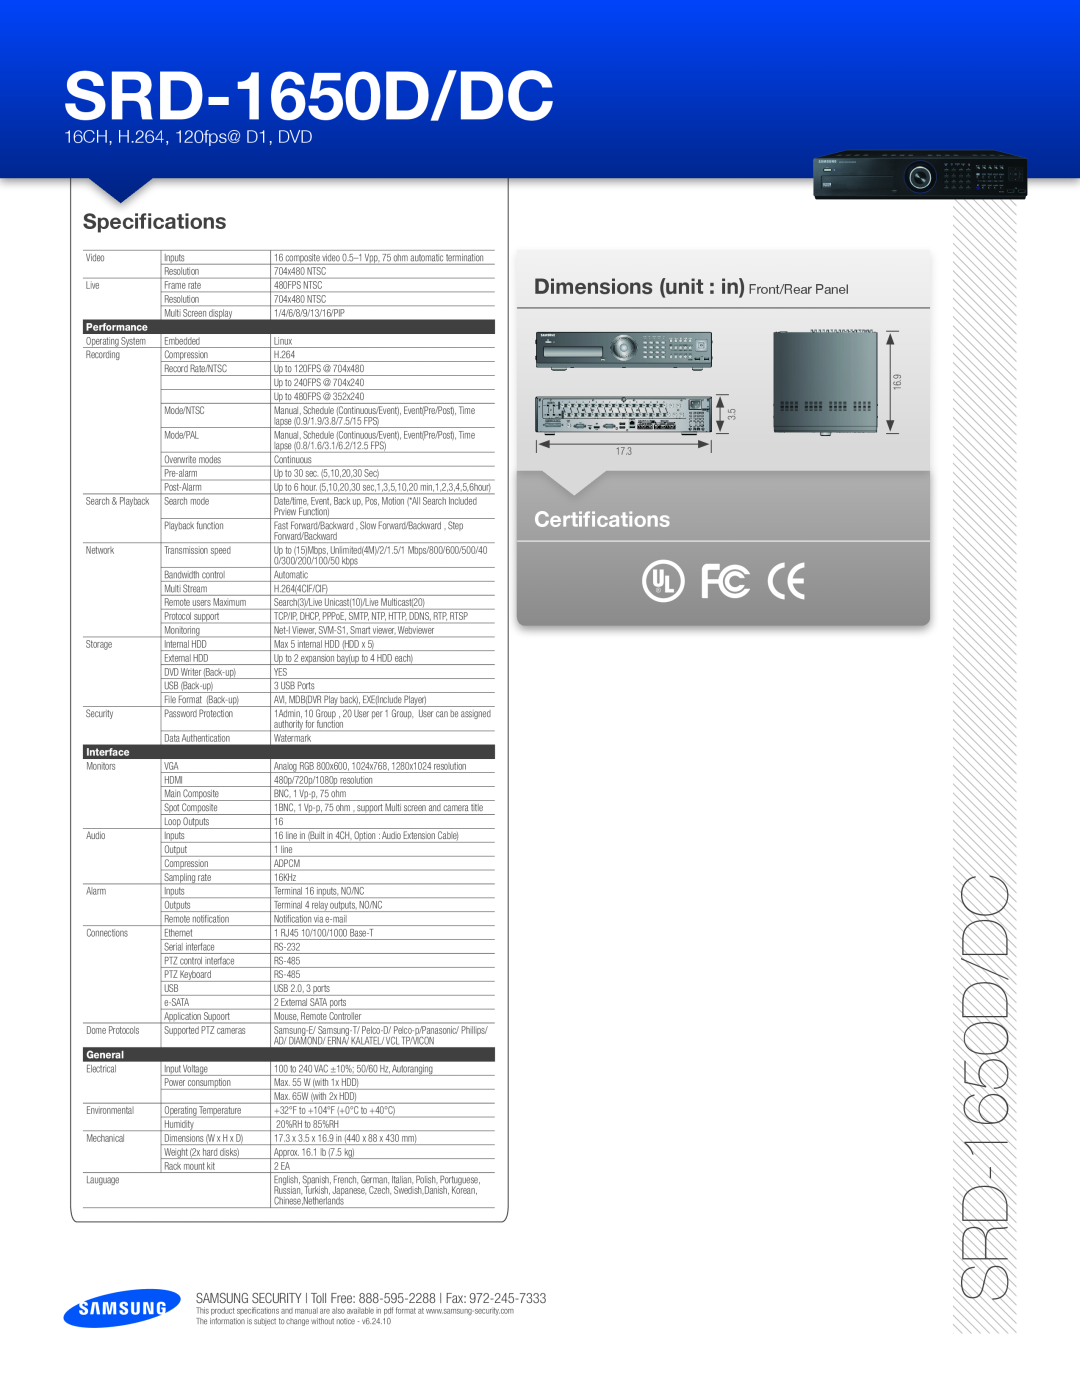 Samsung SRD-1650D/DC Specifications, Dimensions unit in Front/Rear Panel, Certifications, 16CH, H.264, 120fps@ D1, DVD 